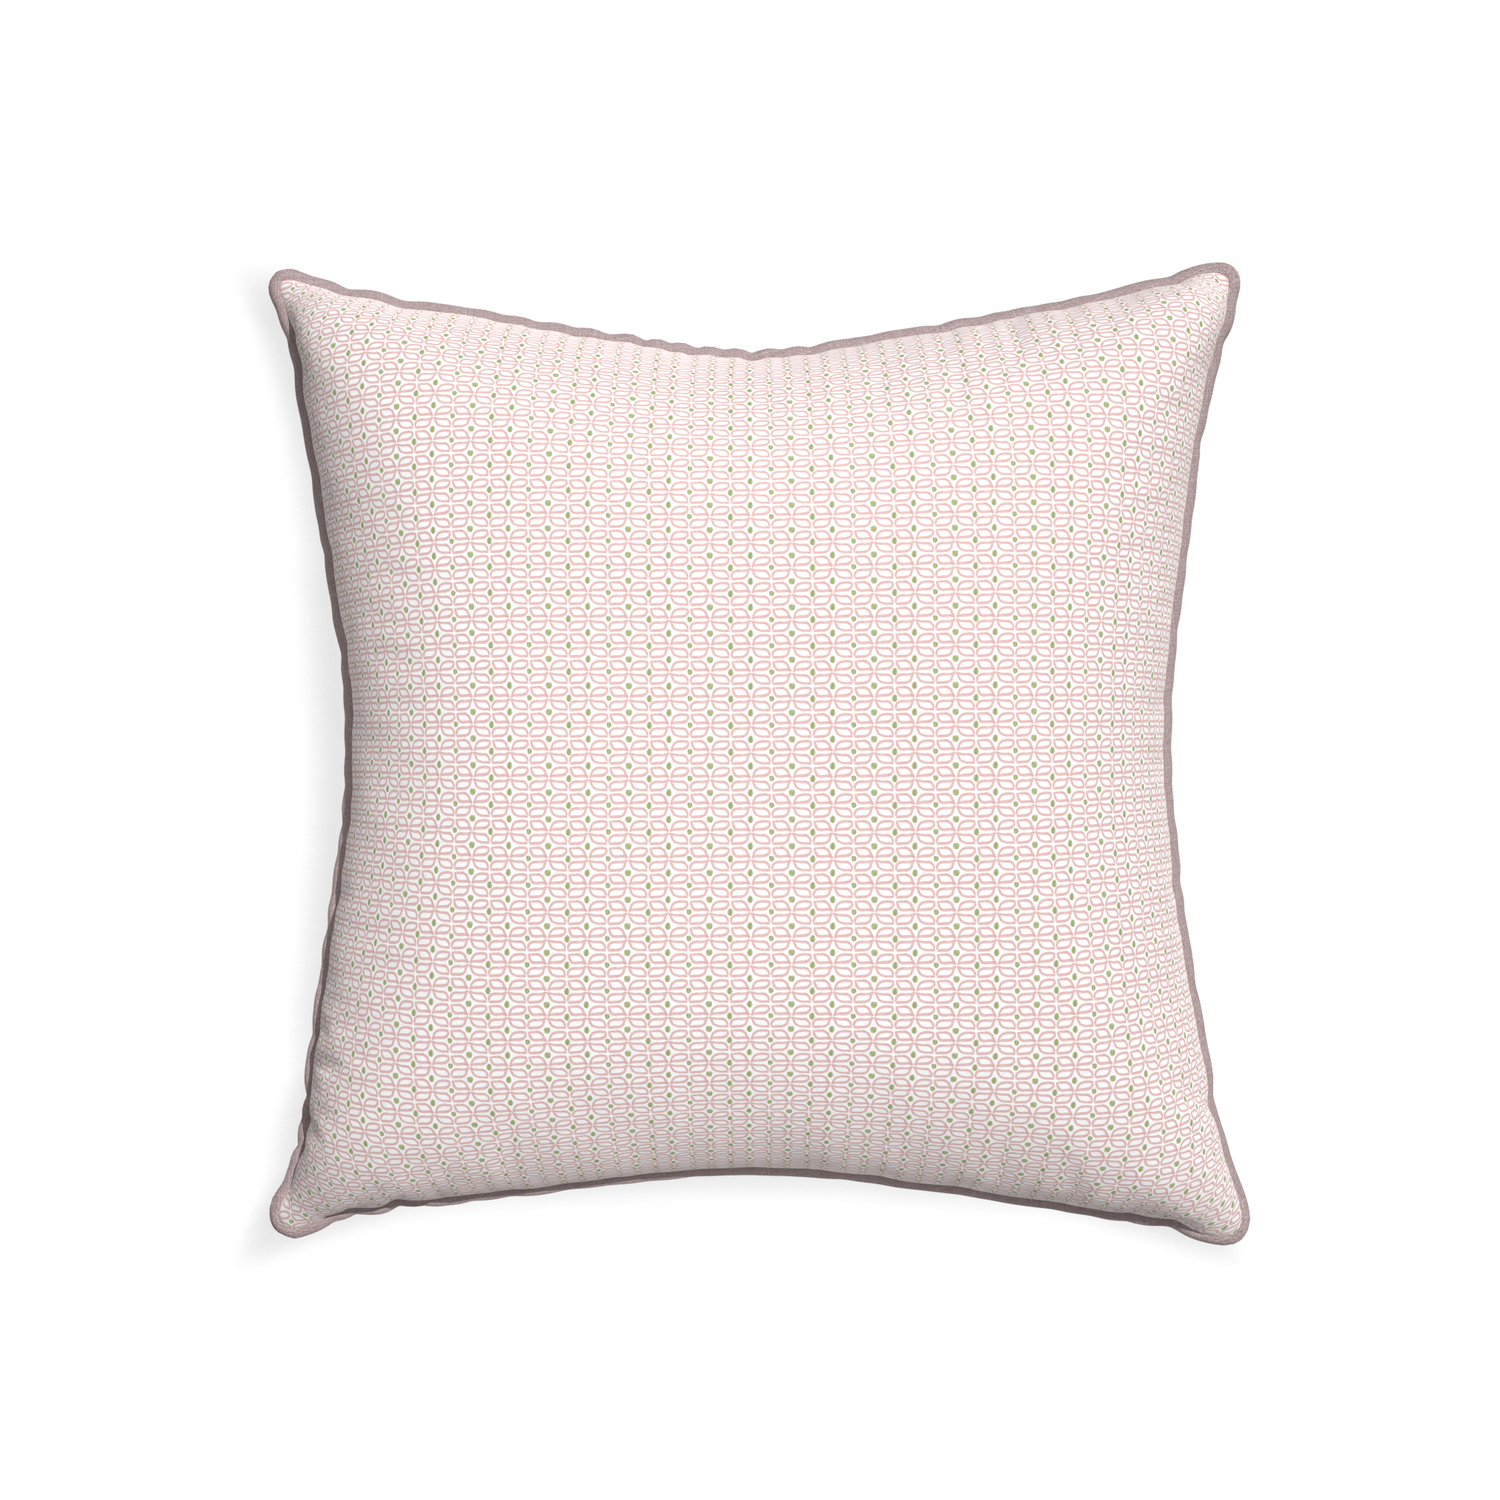 22-square loomi pink custom pink geometricpillow with orchid piping on white background